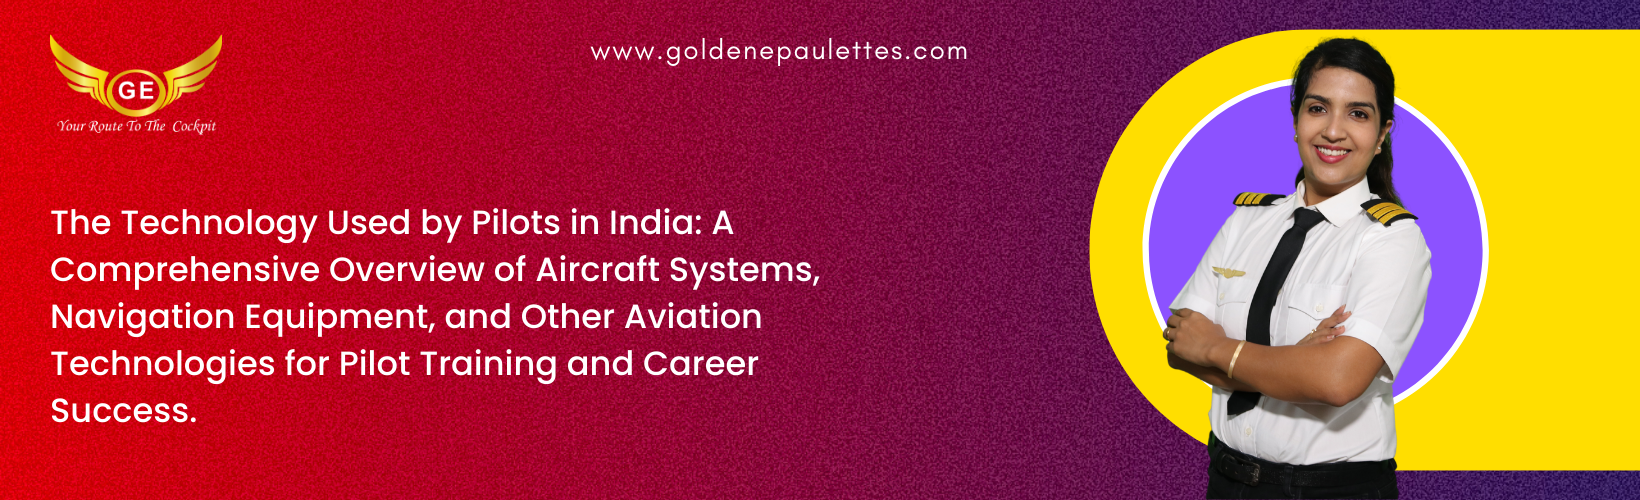 The Technology Used by Pilots in India